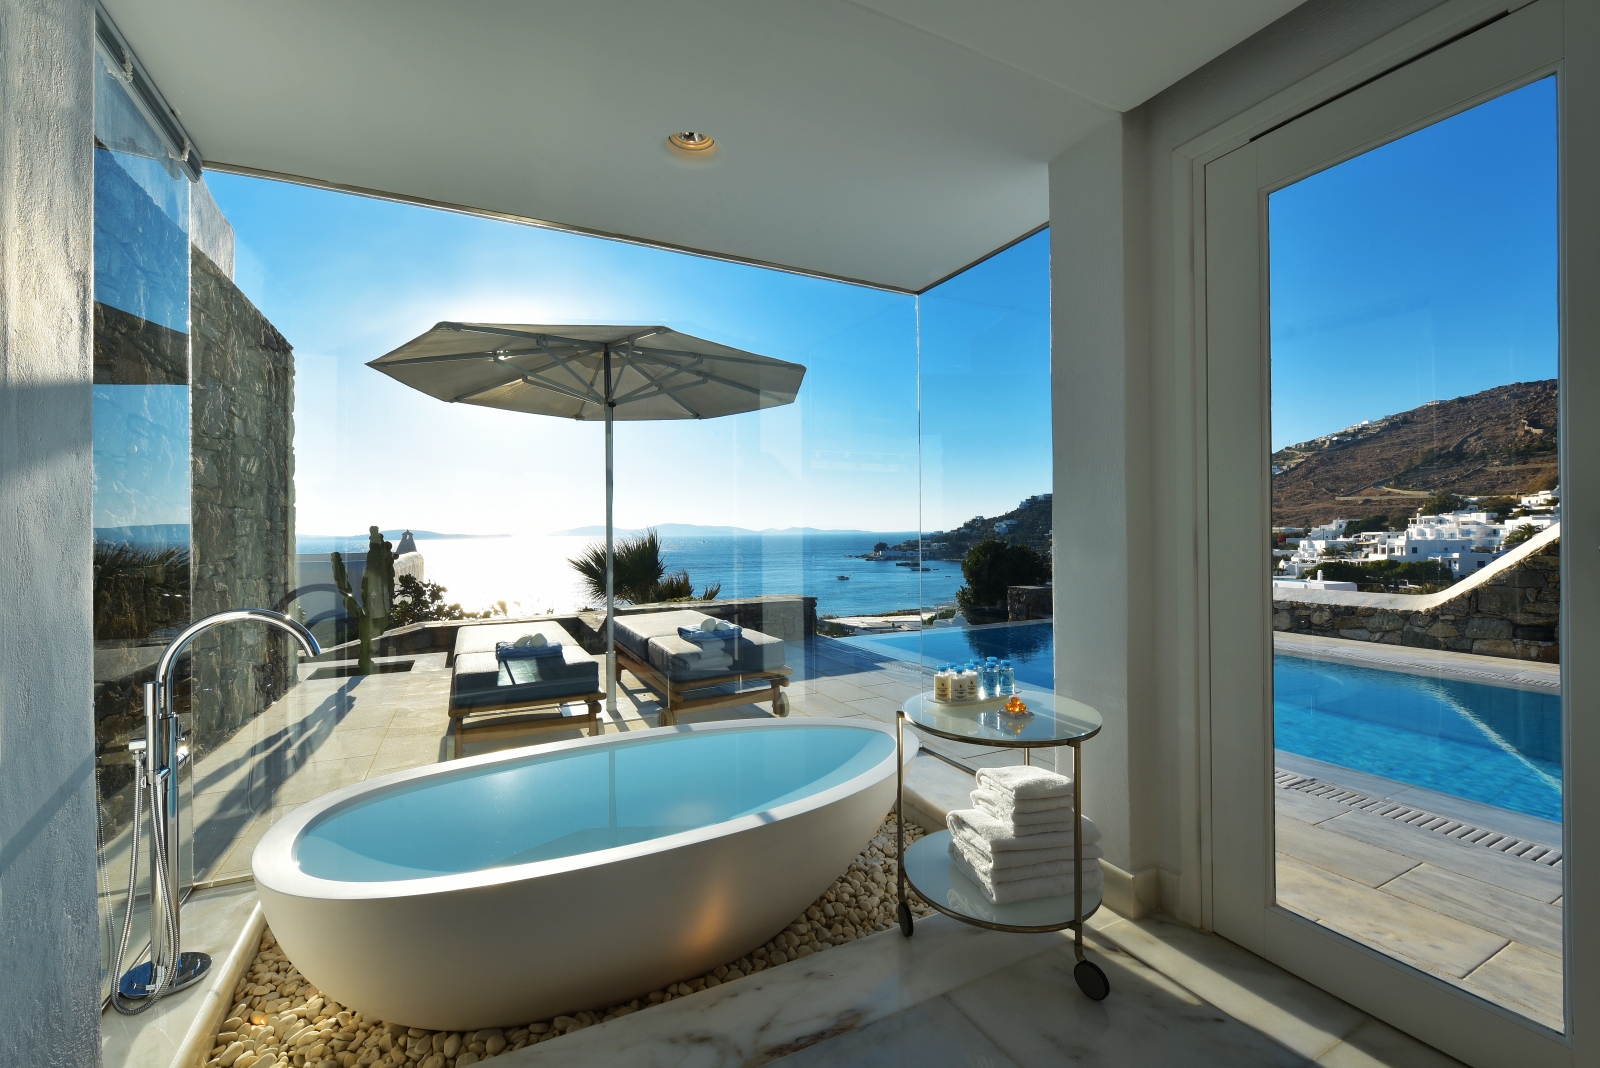 View from a freestanding bathtub in the bathroom of a Grand Suite overlooking the private pool and the Aegean Sea at luxury resort Mykonos Grand, Greece